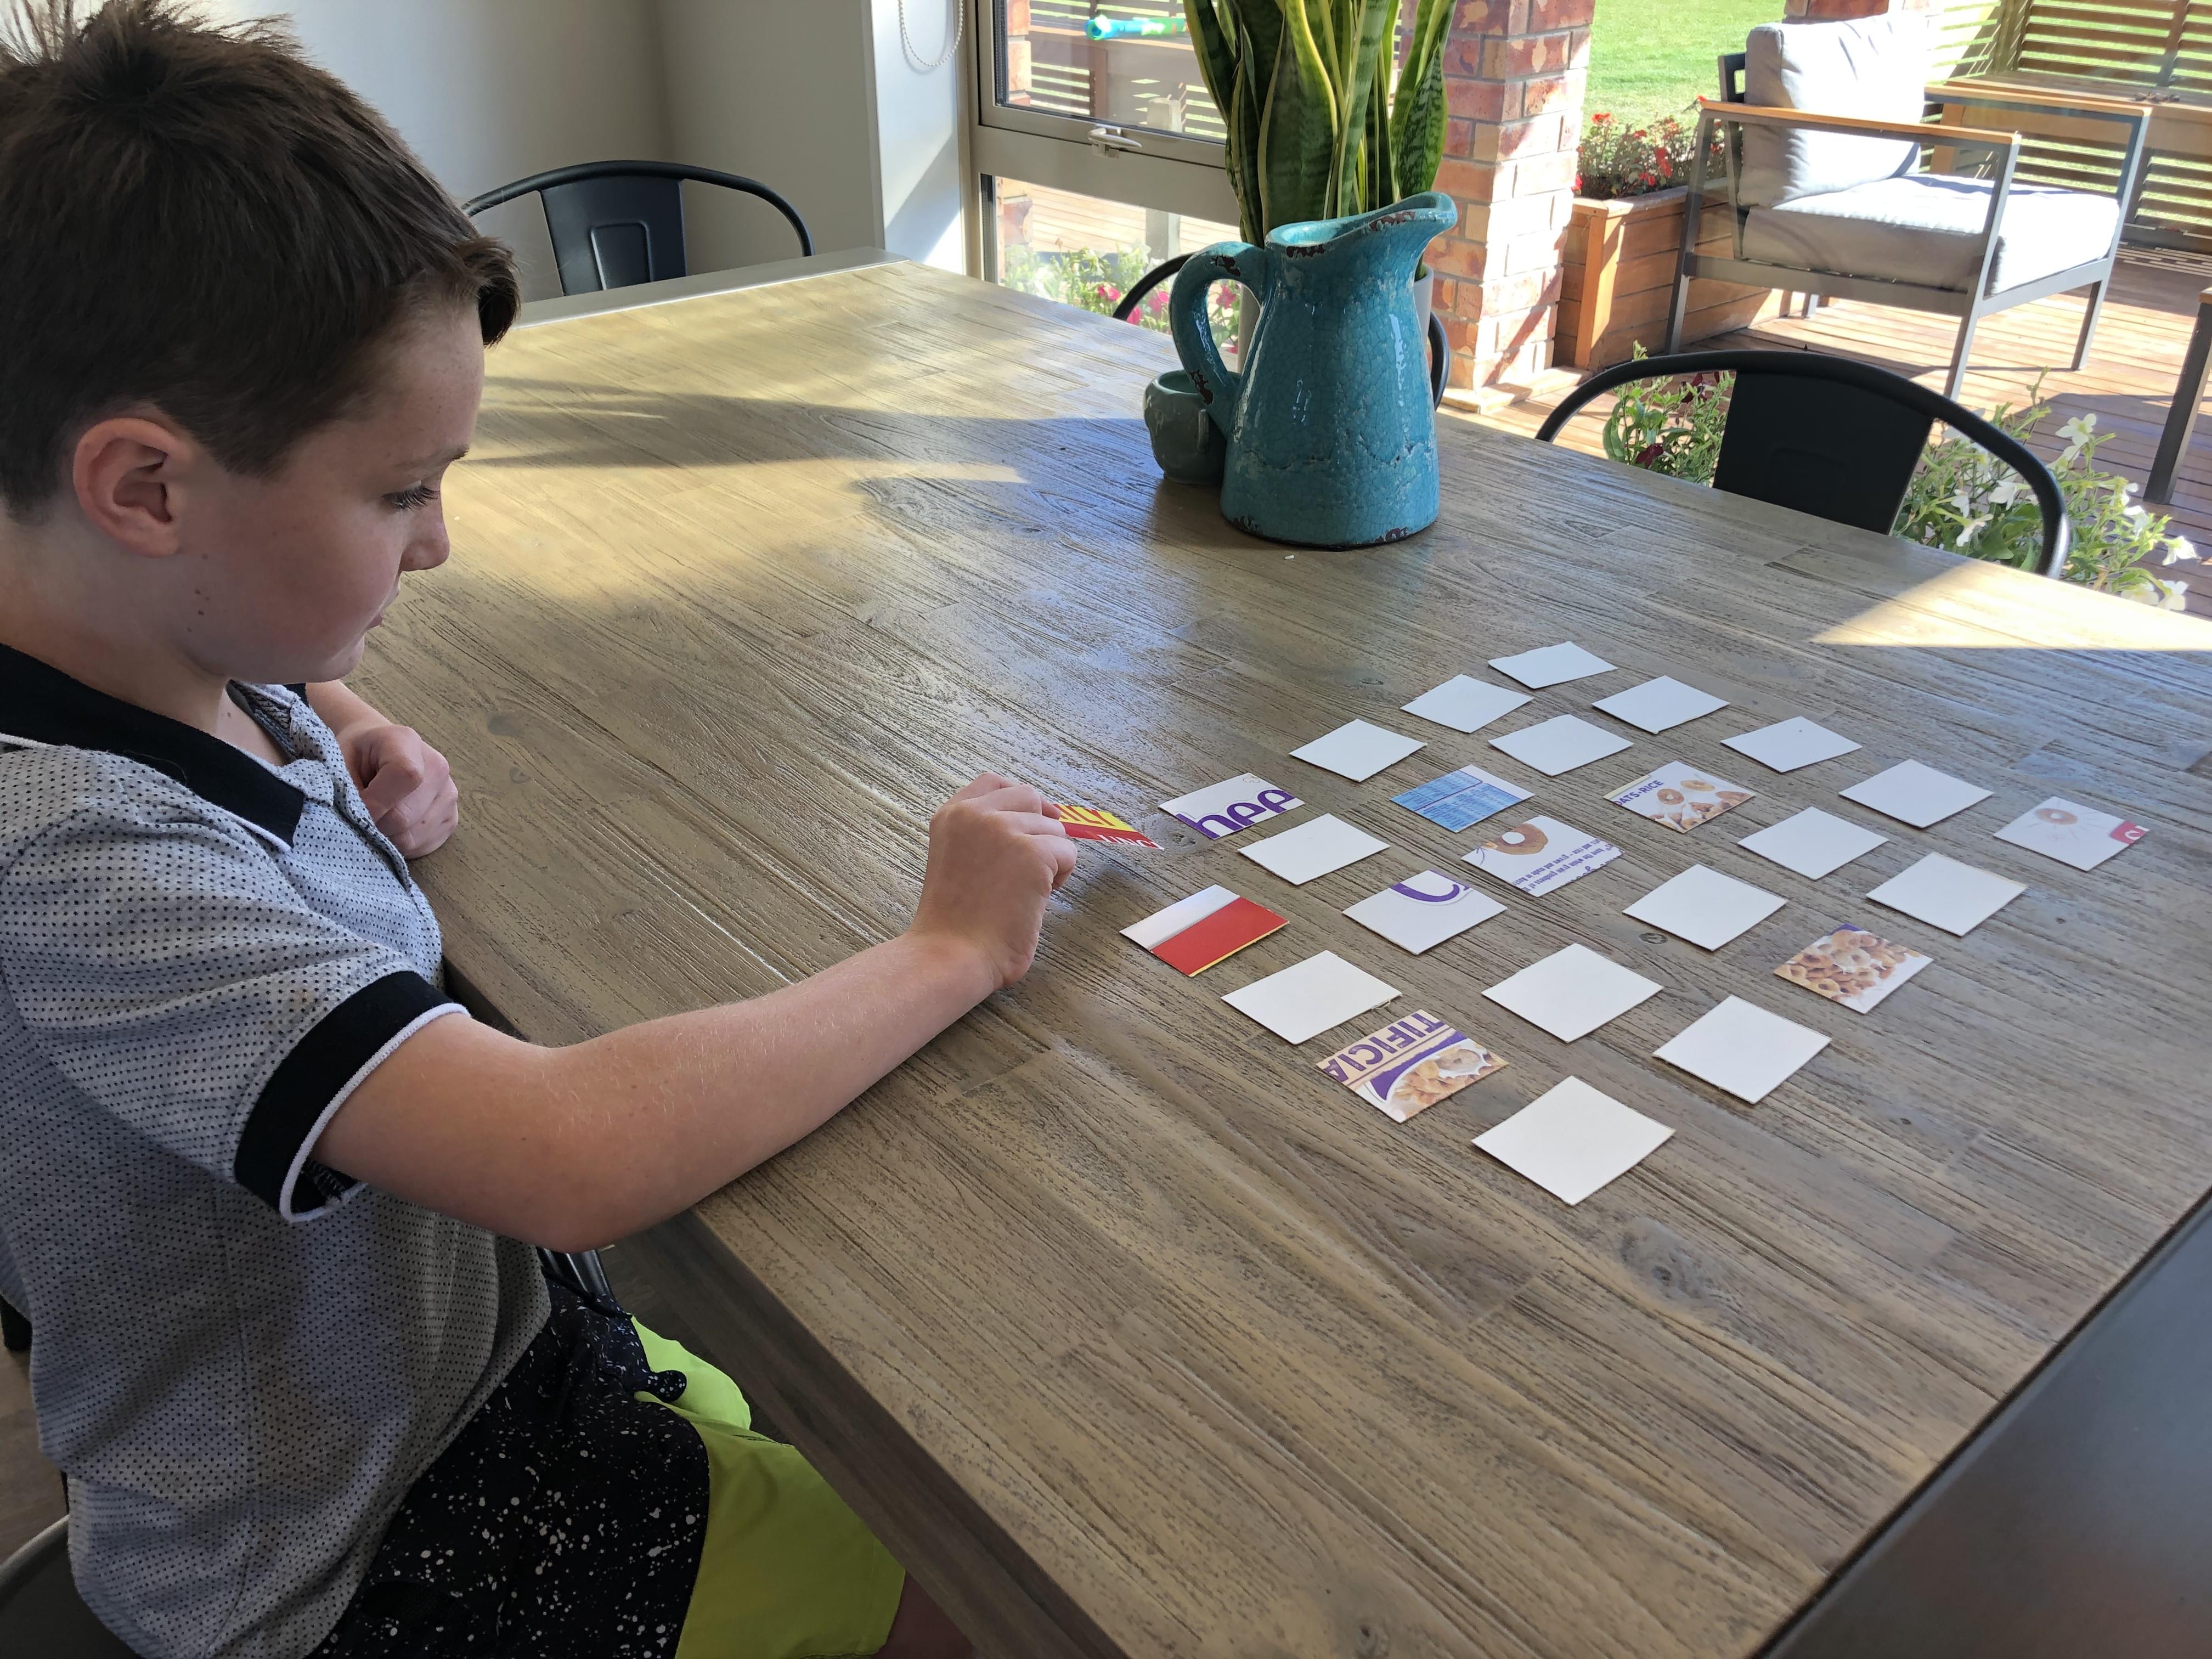 Child placing cards in a five by five grid.